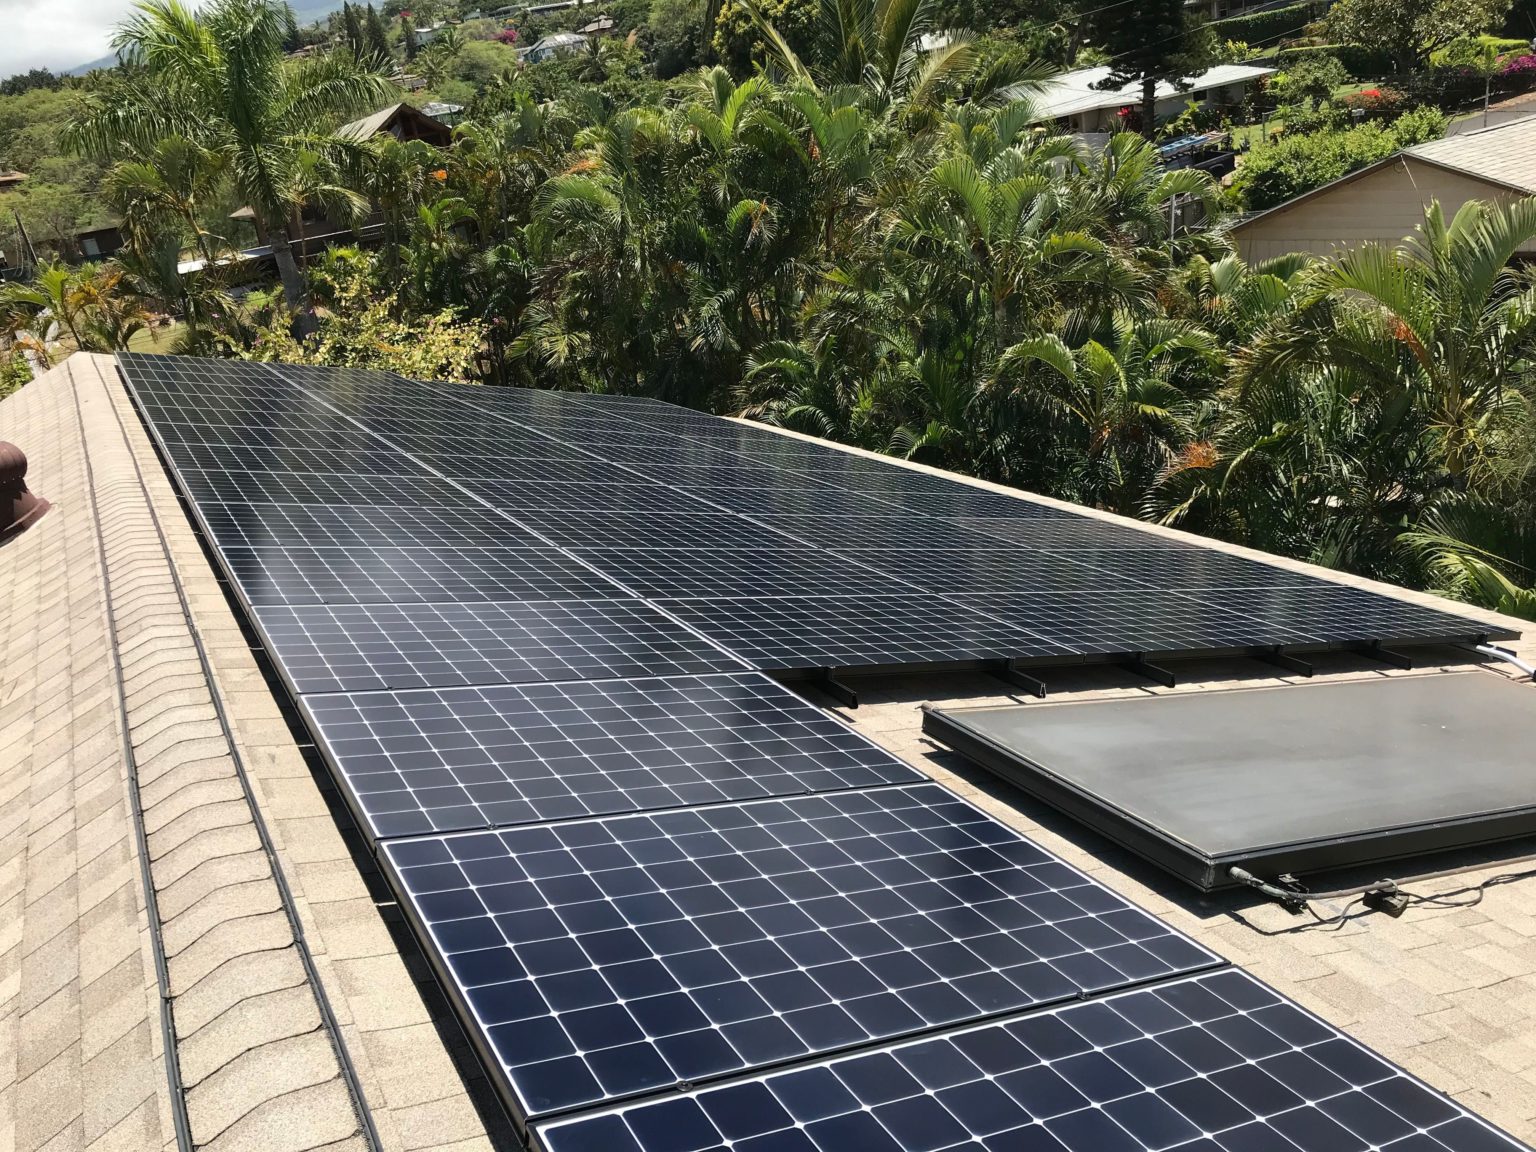 Why You Need Solar Panel Systems for Homes in Maui